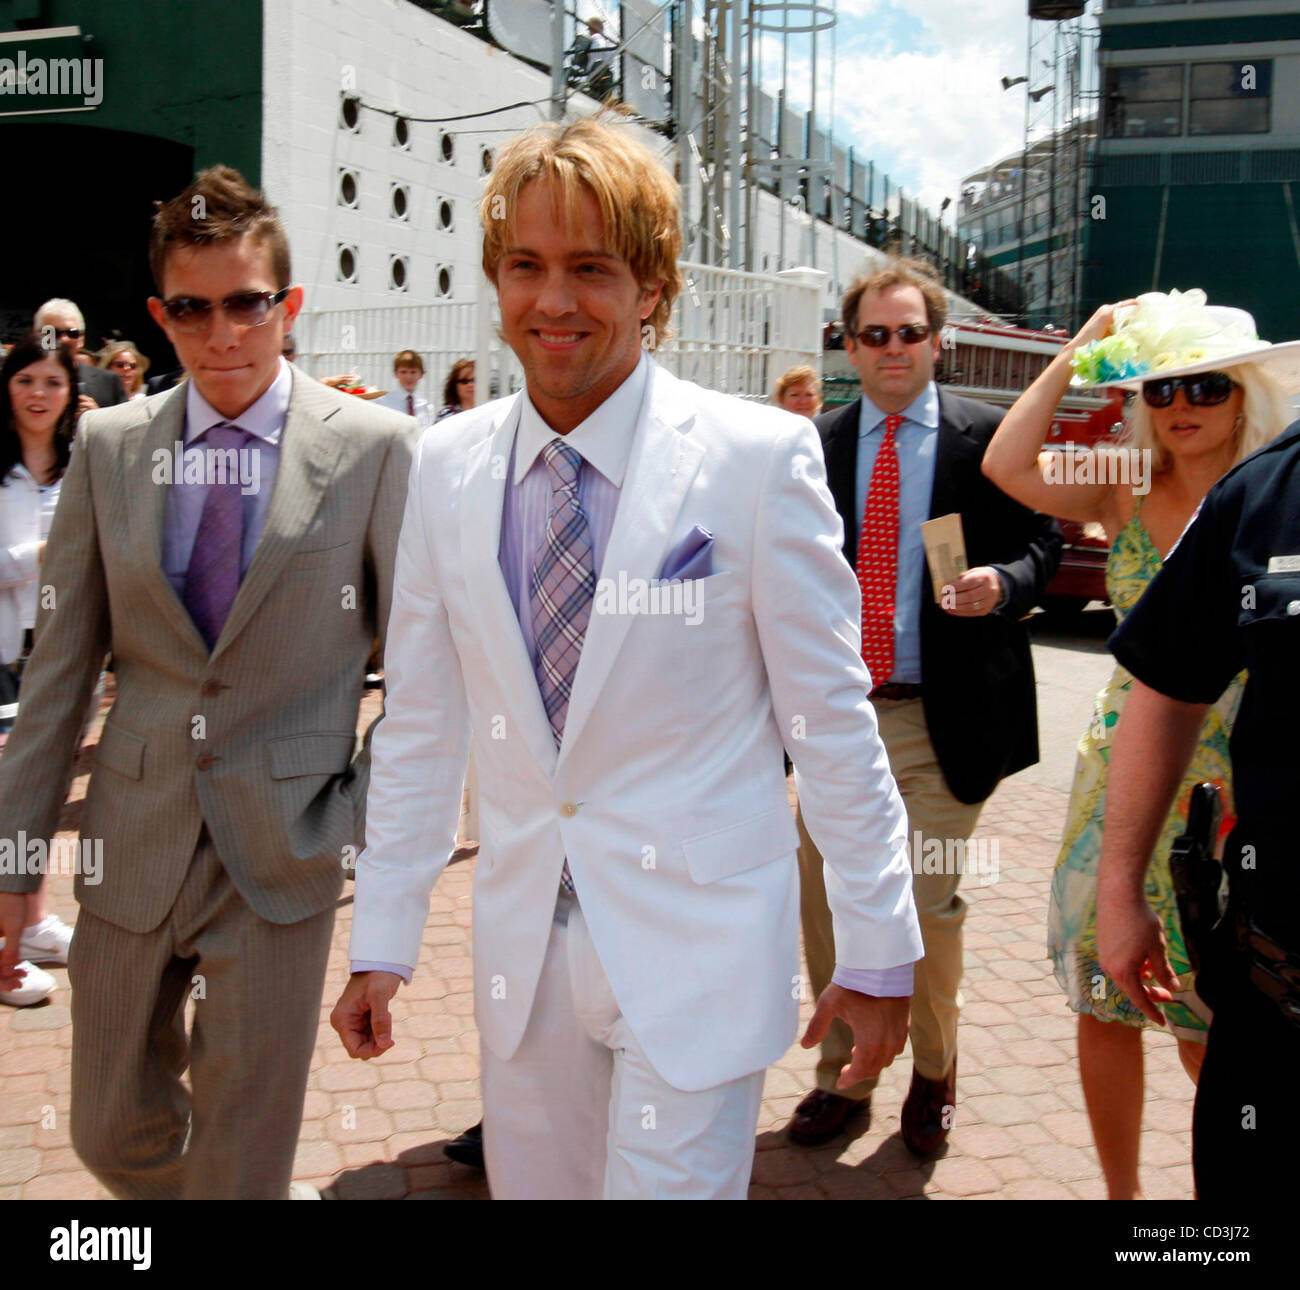 Larry Birkhead arrived at the 134th running of the Kentucky Derby Saturday May 3, 2008, at Churchill Downs, Louisville, Ky. Photo by Charles Bertram Stock Photo